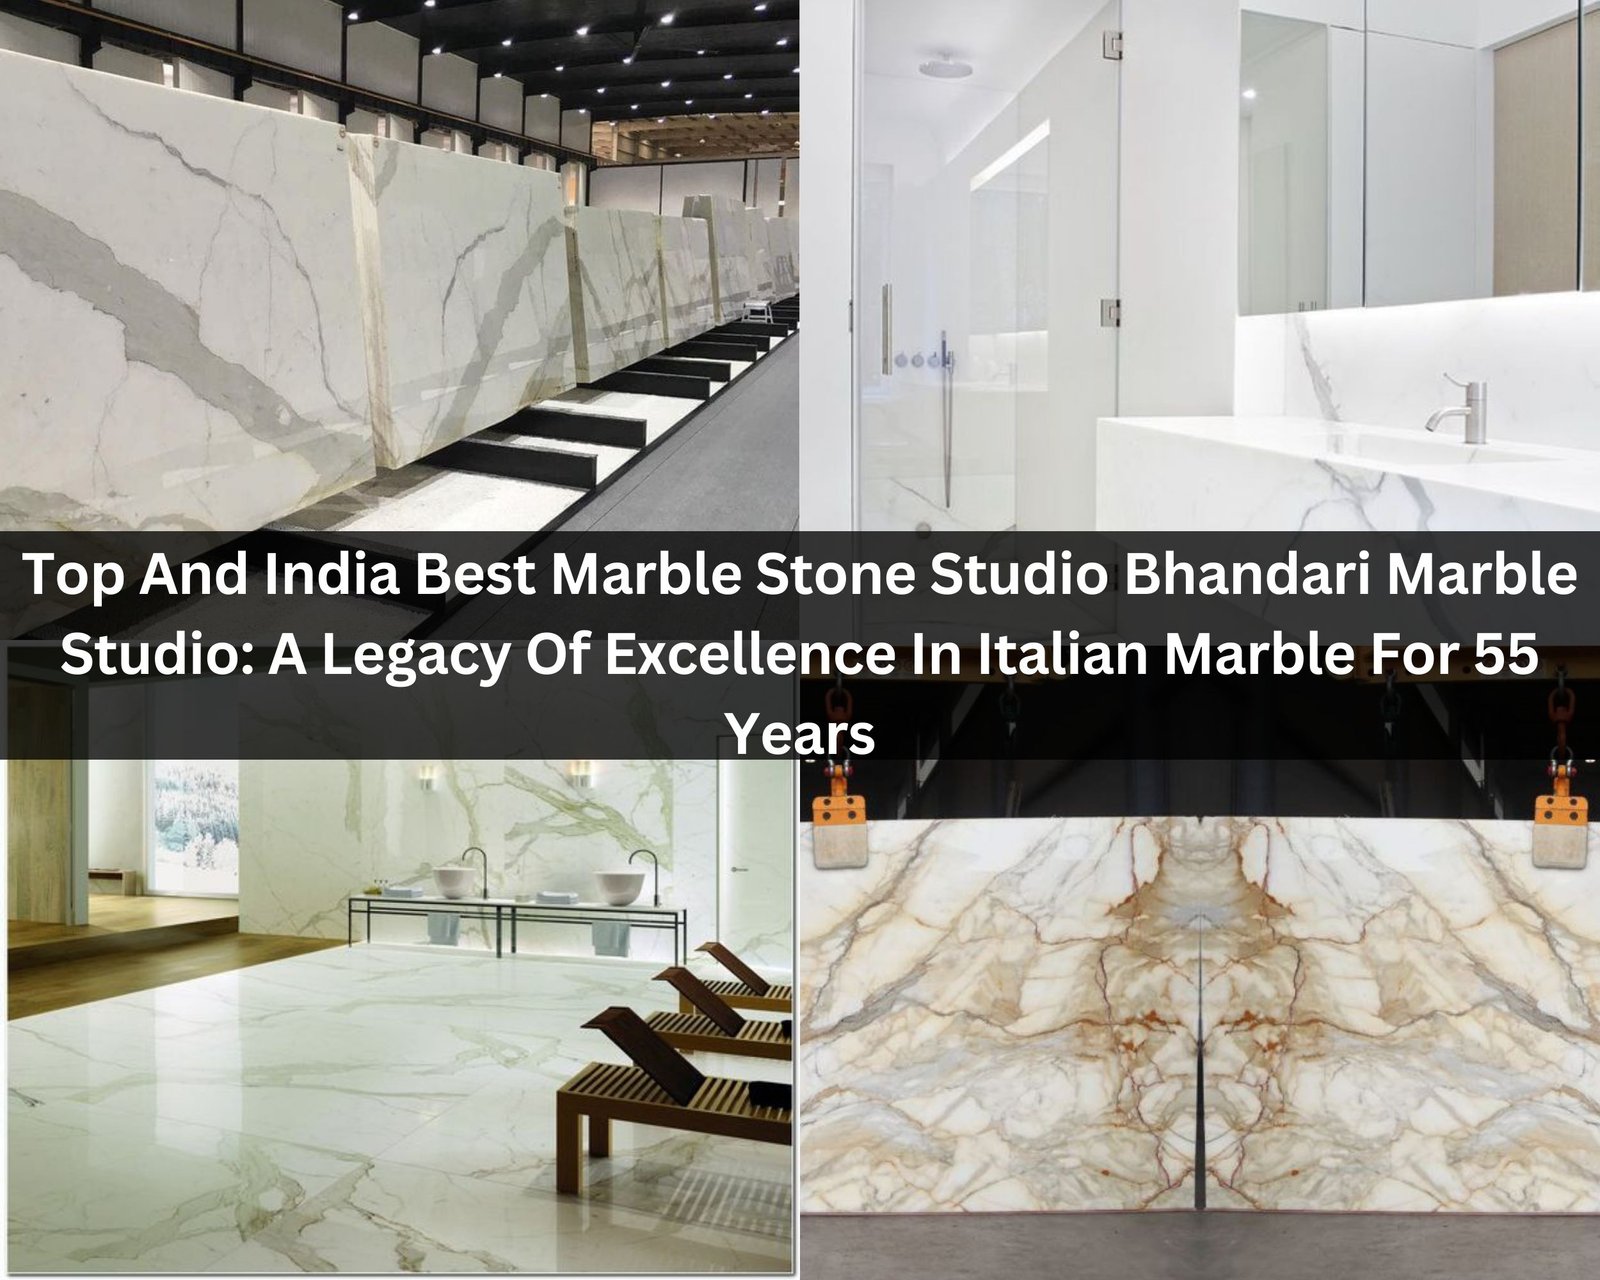 Top And India Best Marble Stone Studio Bhandari Marble Studio: A Legacy Of Excellence In Italian Marble For 55 Years